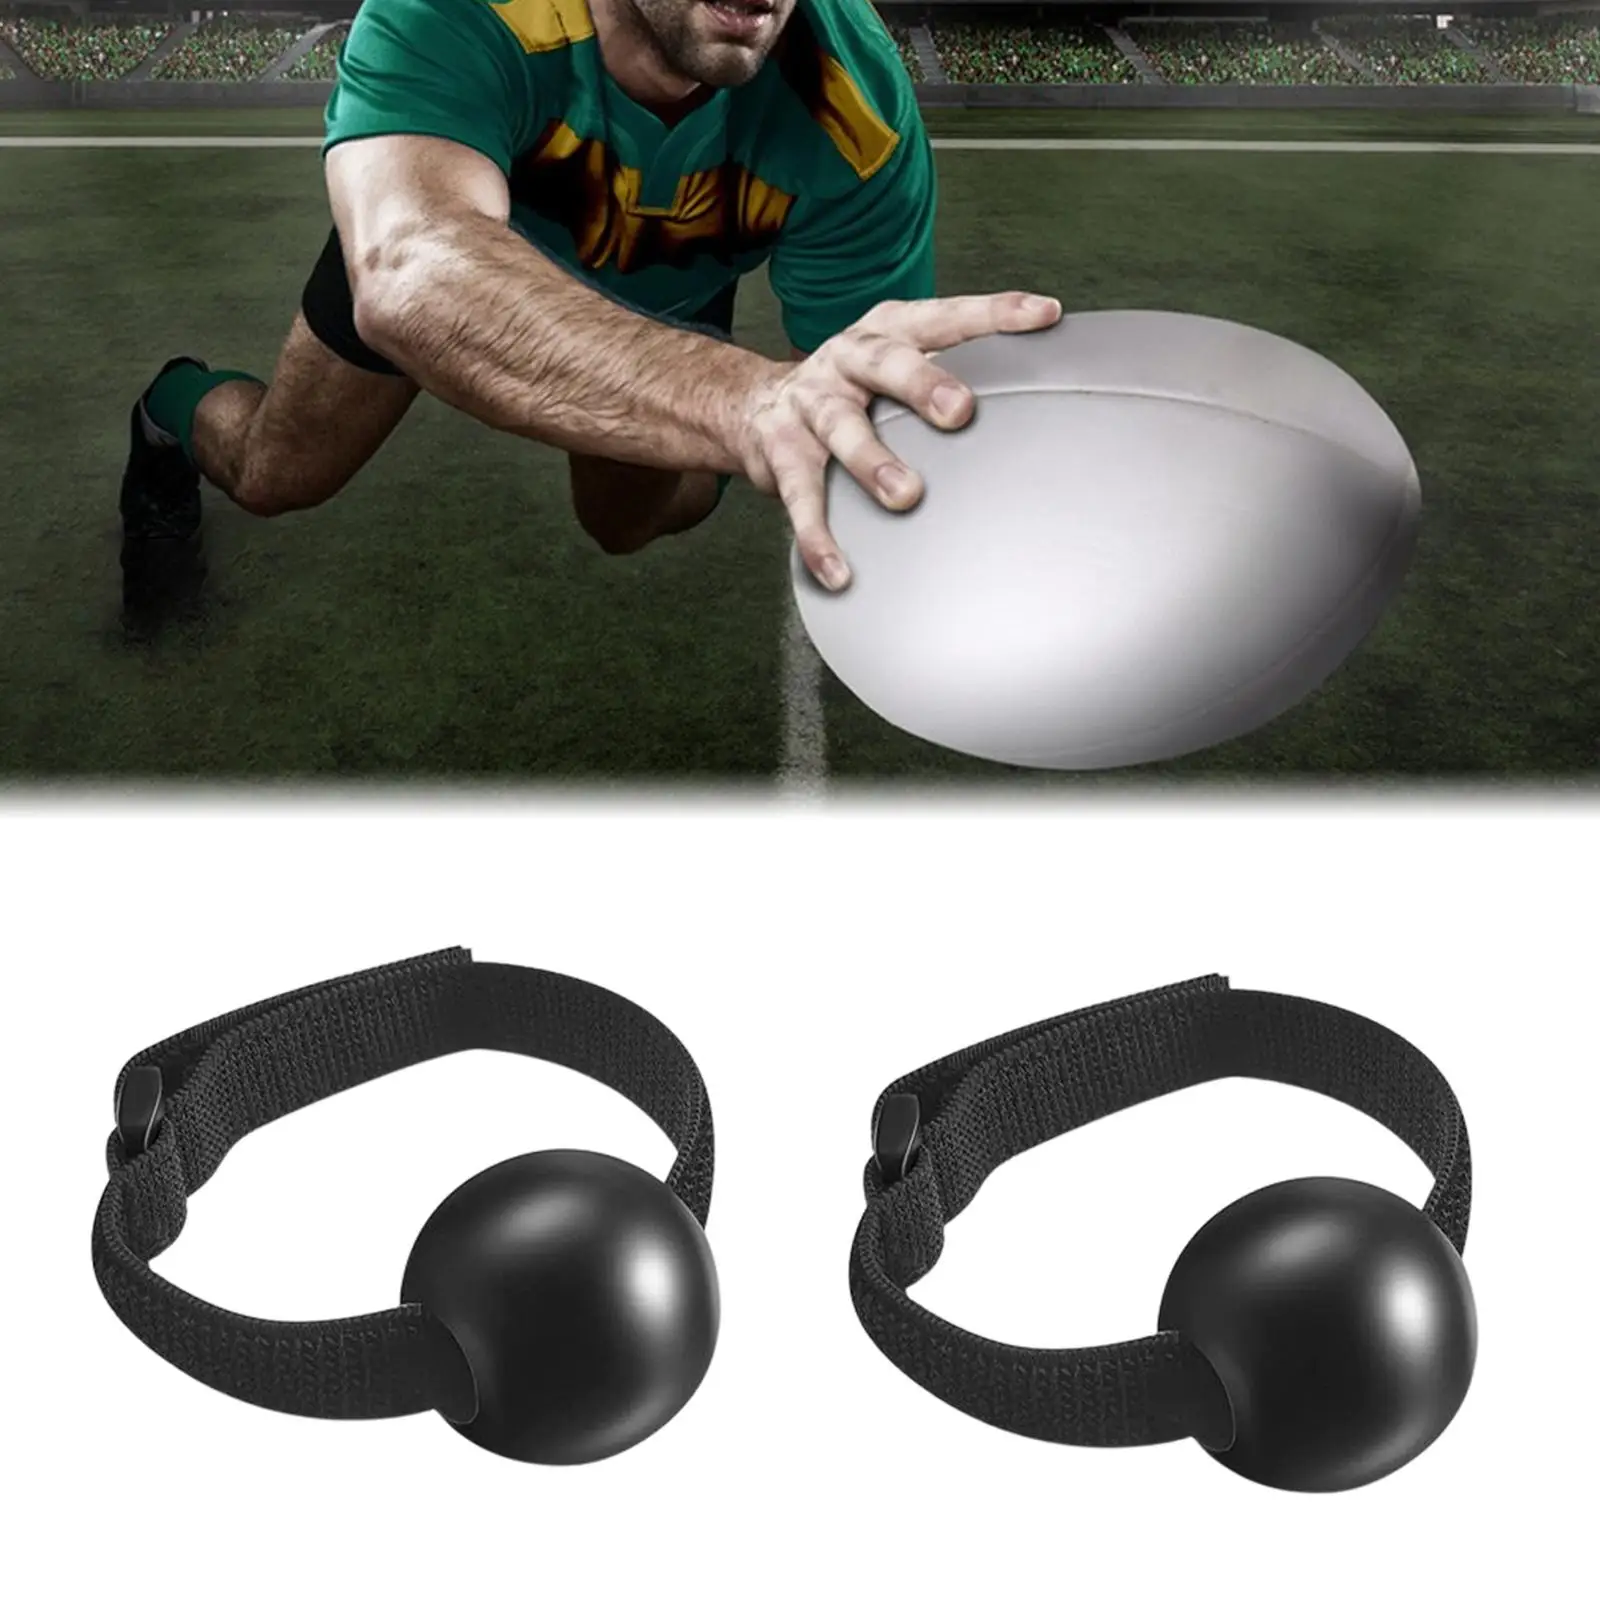 Volleyball Training Aid Volleyball Gifts Soccer Training Belt Skill Volleyball Adult Kids Rugby Youth Volleyball Trainer